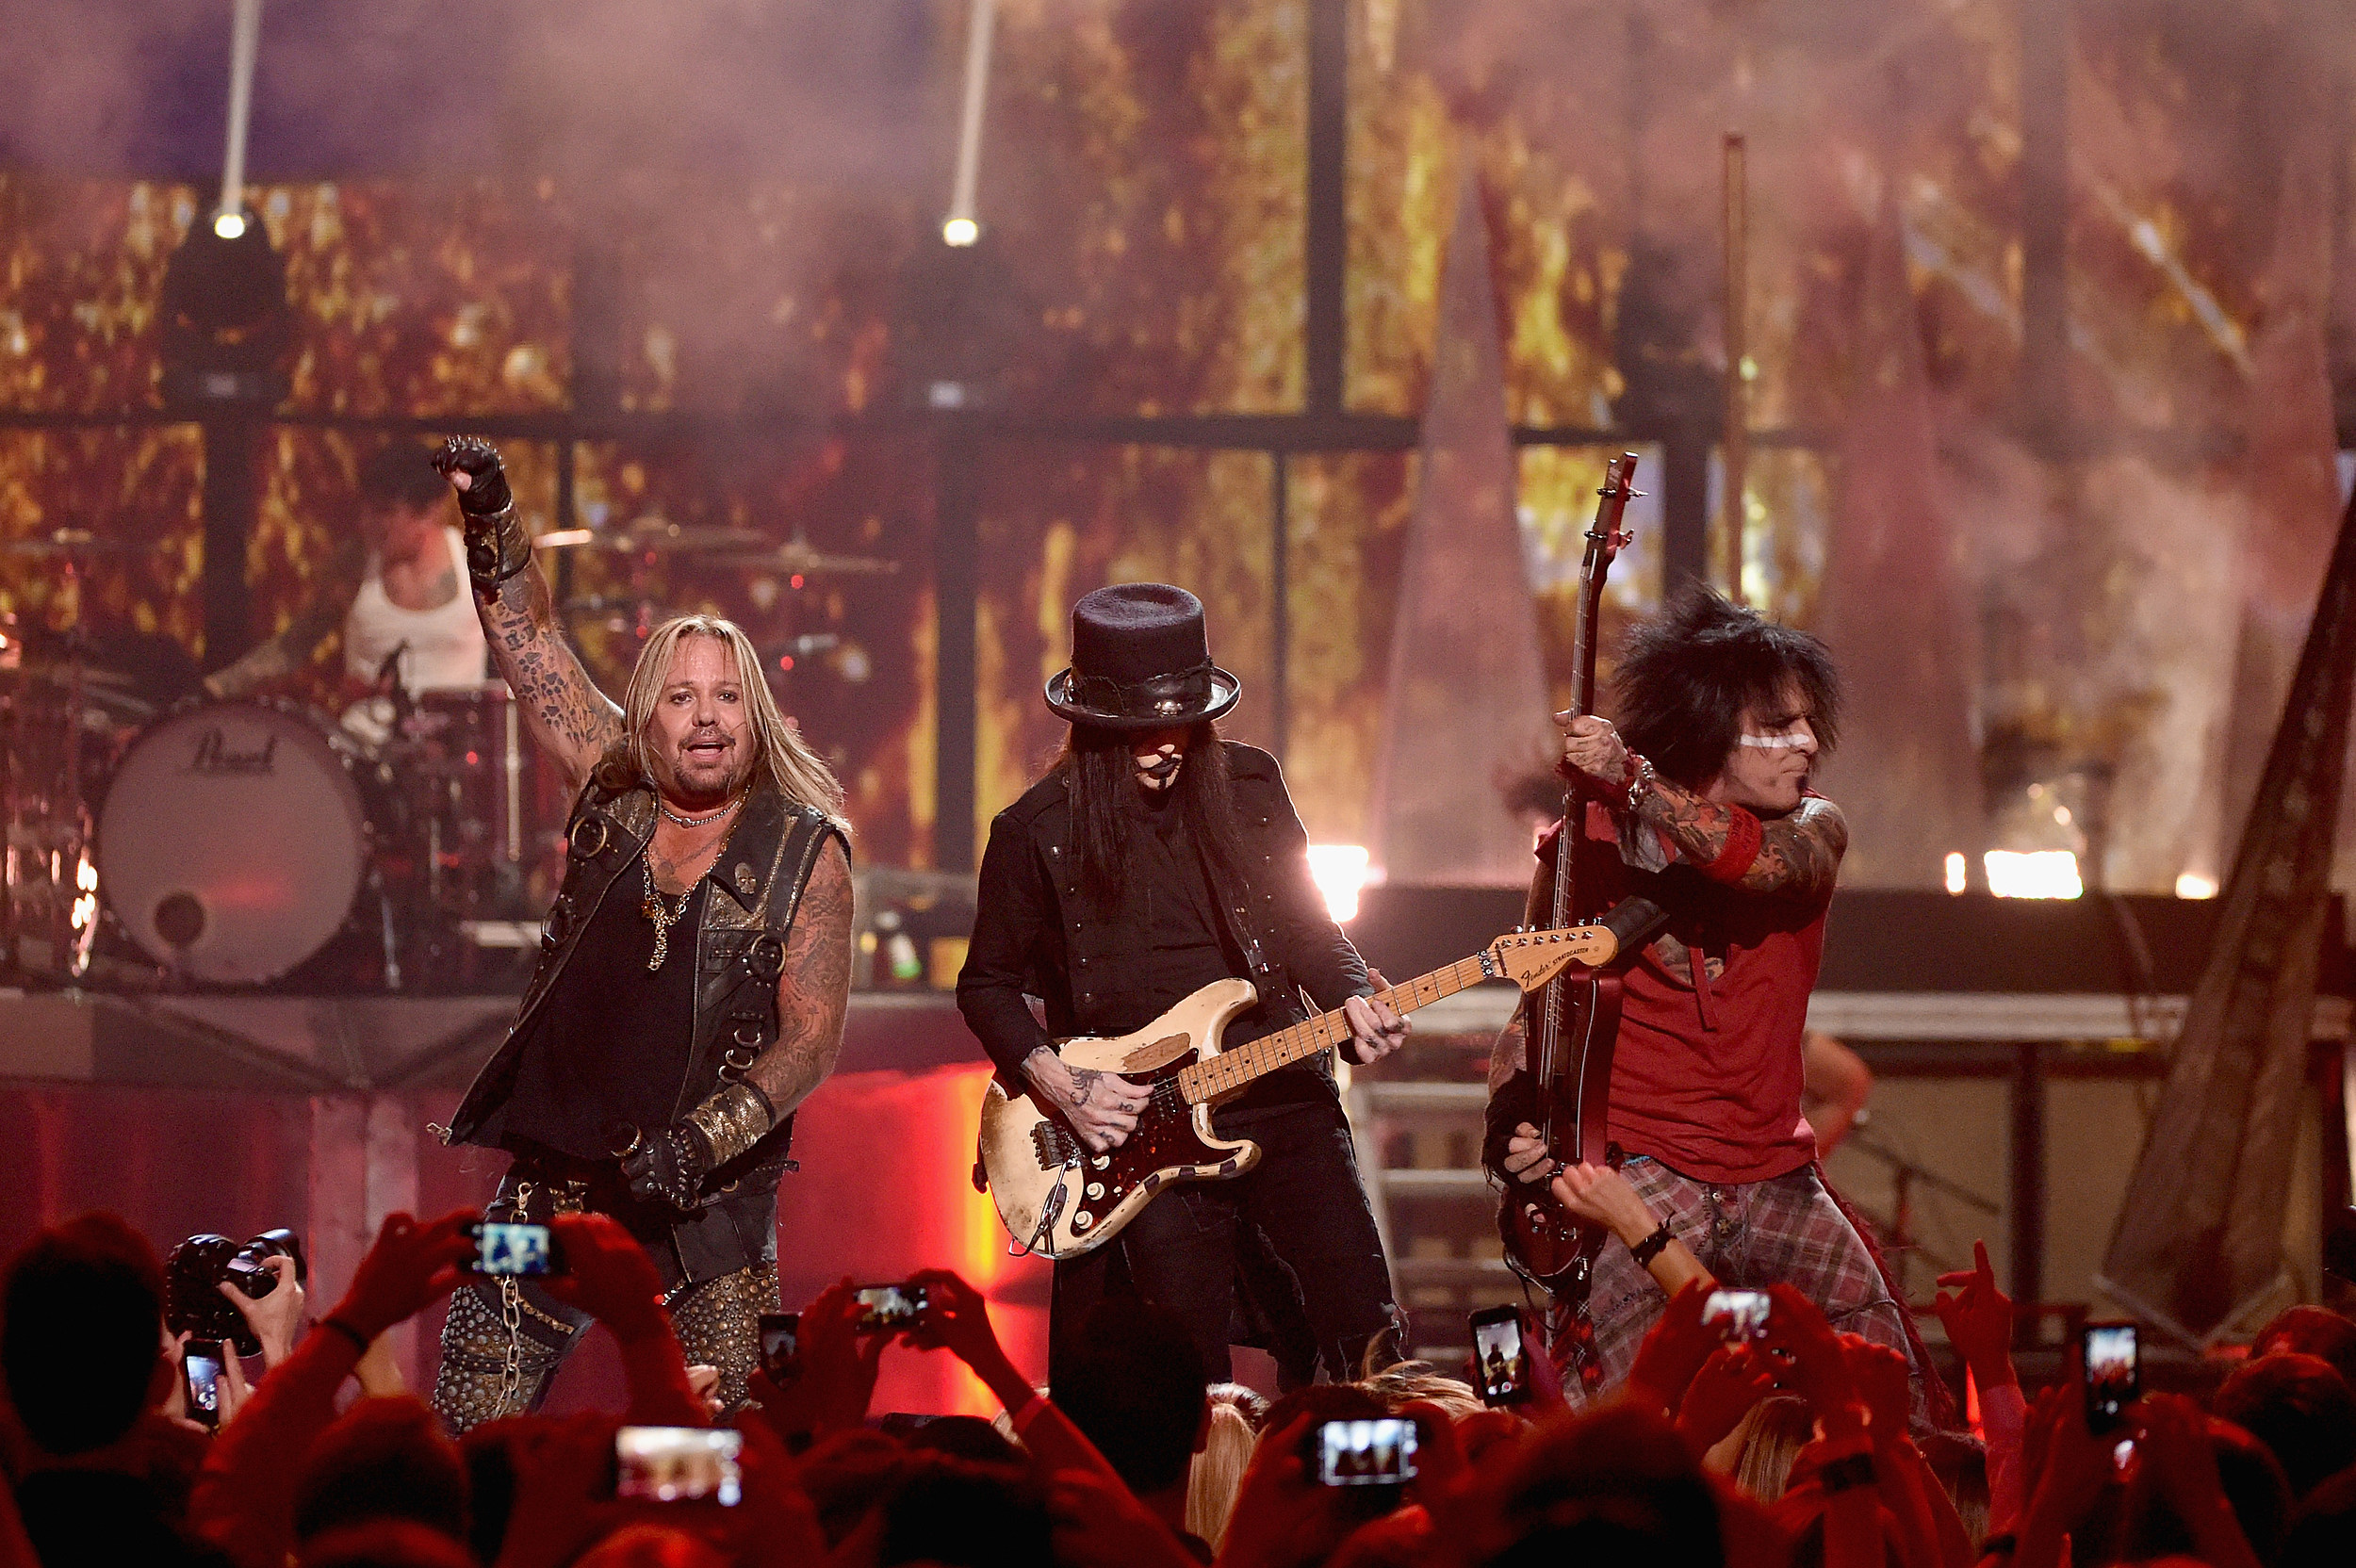 Motley Crue is Now Stopping in Indianapolis! Enter to Win Tix!